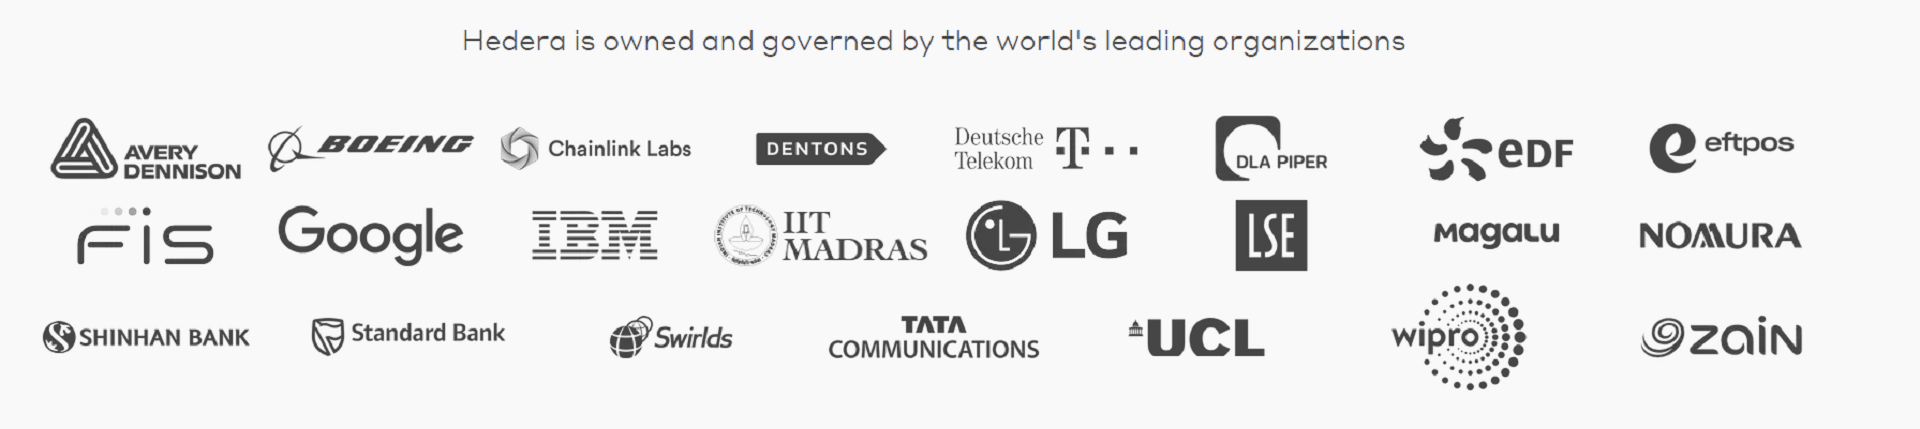 partners of hedera